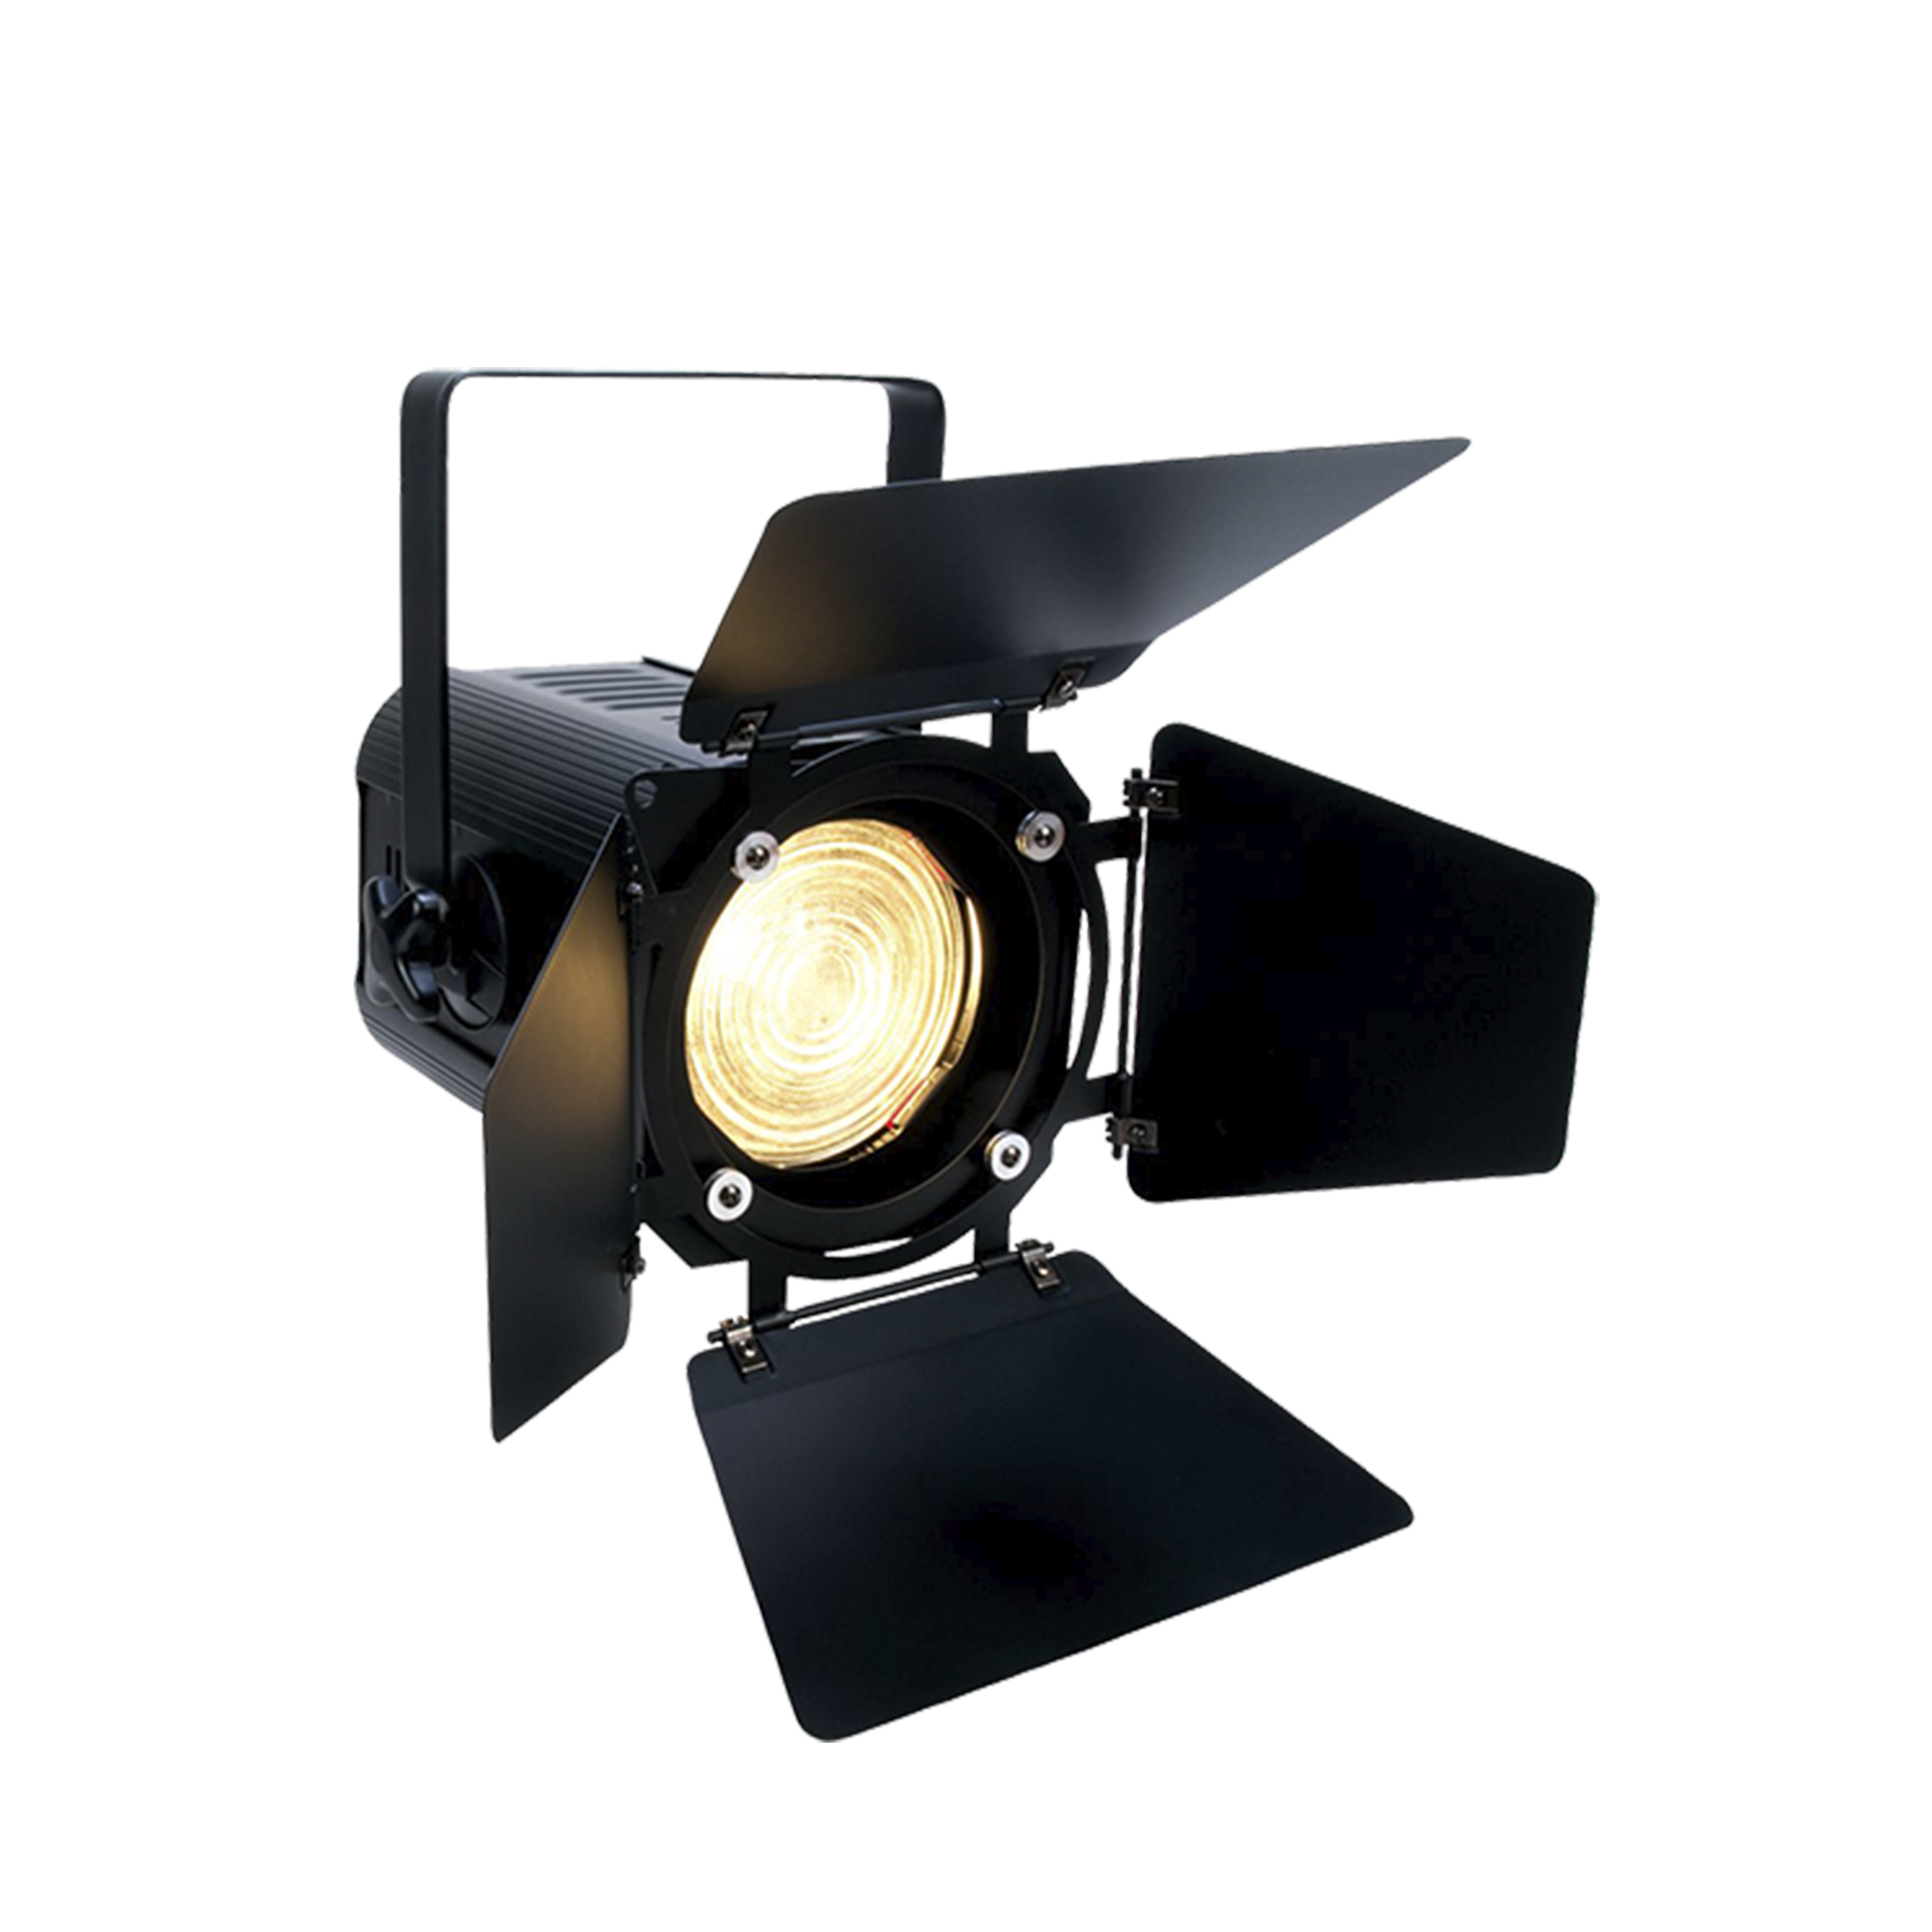 ADJ Products Encore FR150Z Lighting fixture is equipped with an 8″ Fresnel lens & powered by a 130W LED engine, Medium